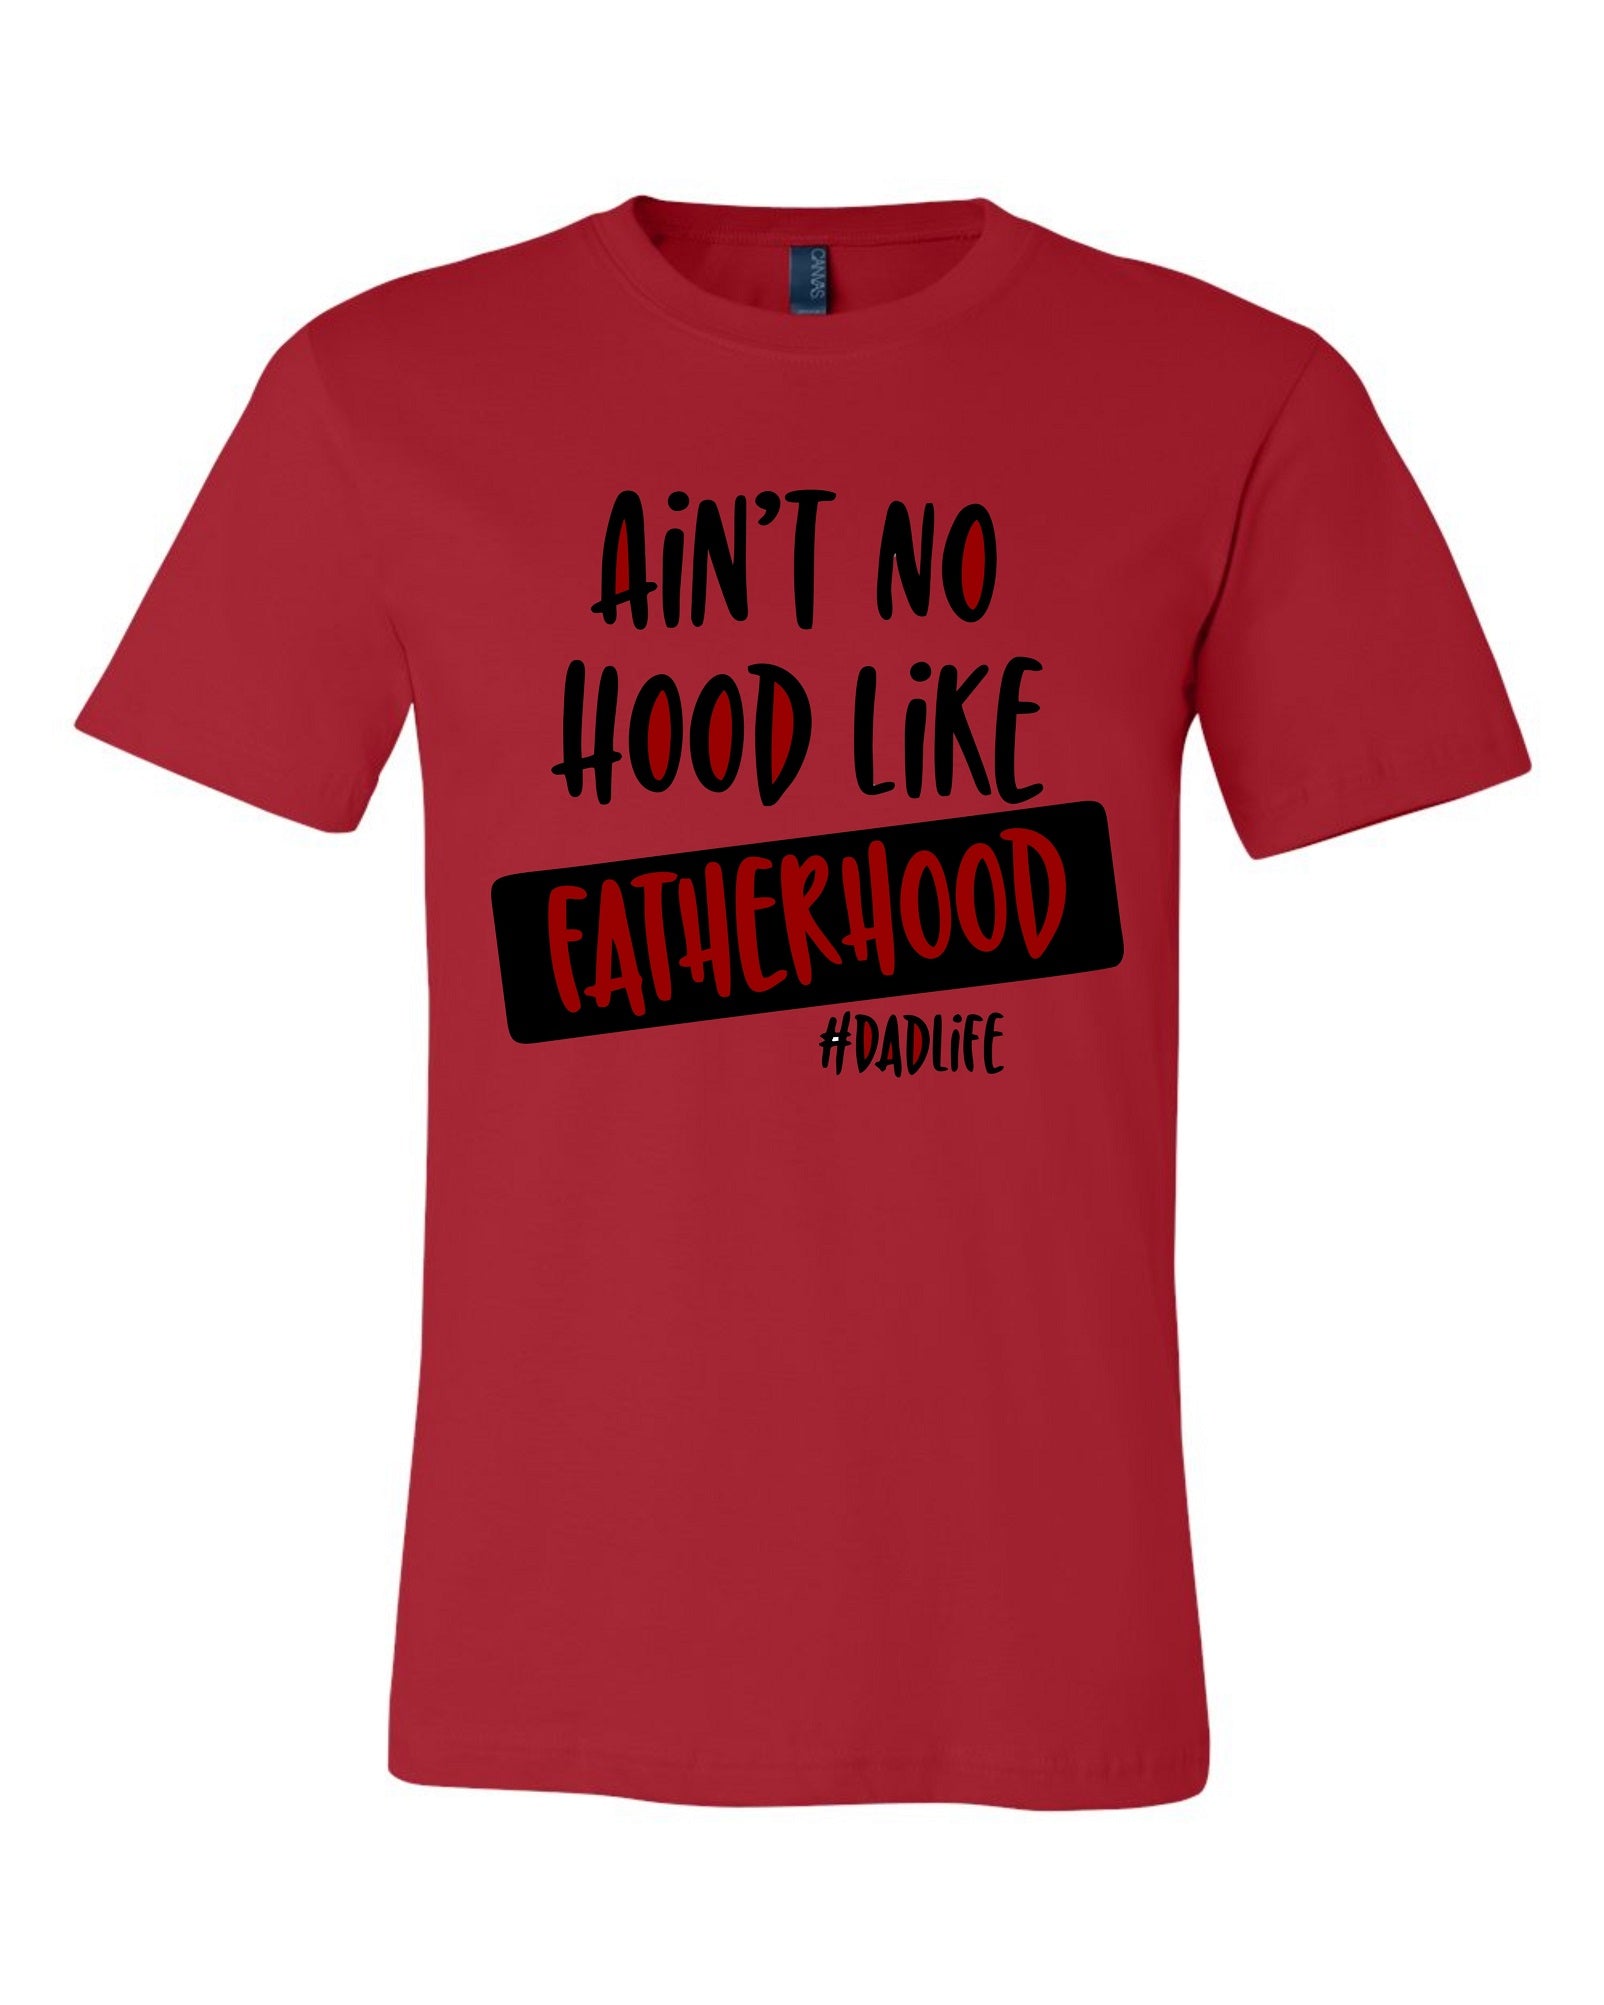 No Hood like Fatherhood T-shirt - Momma G's Children's Boutique, Screen Printing, Embroidery & More